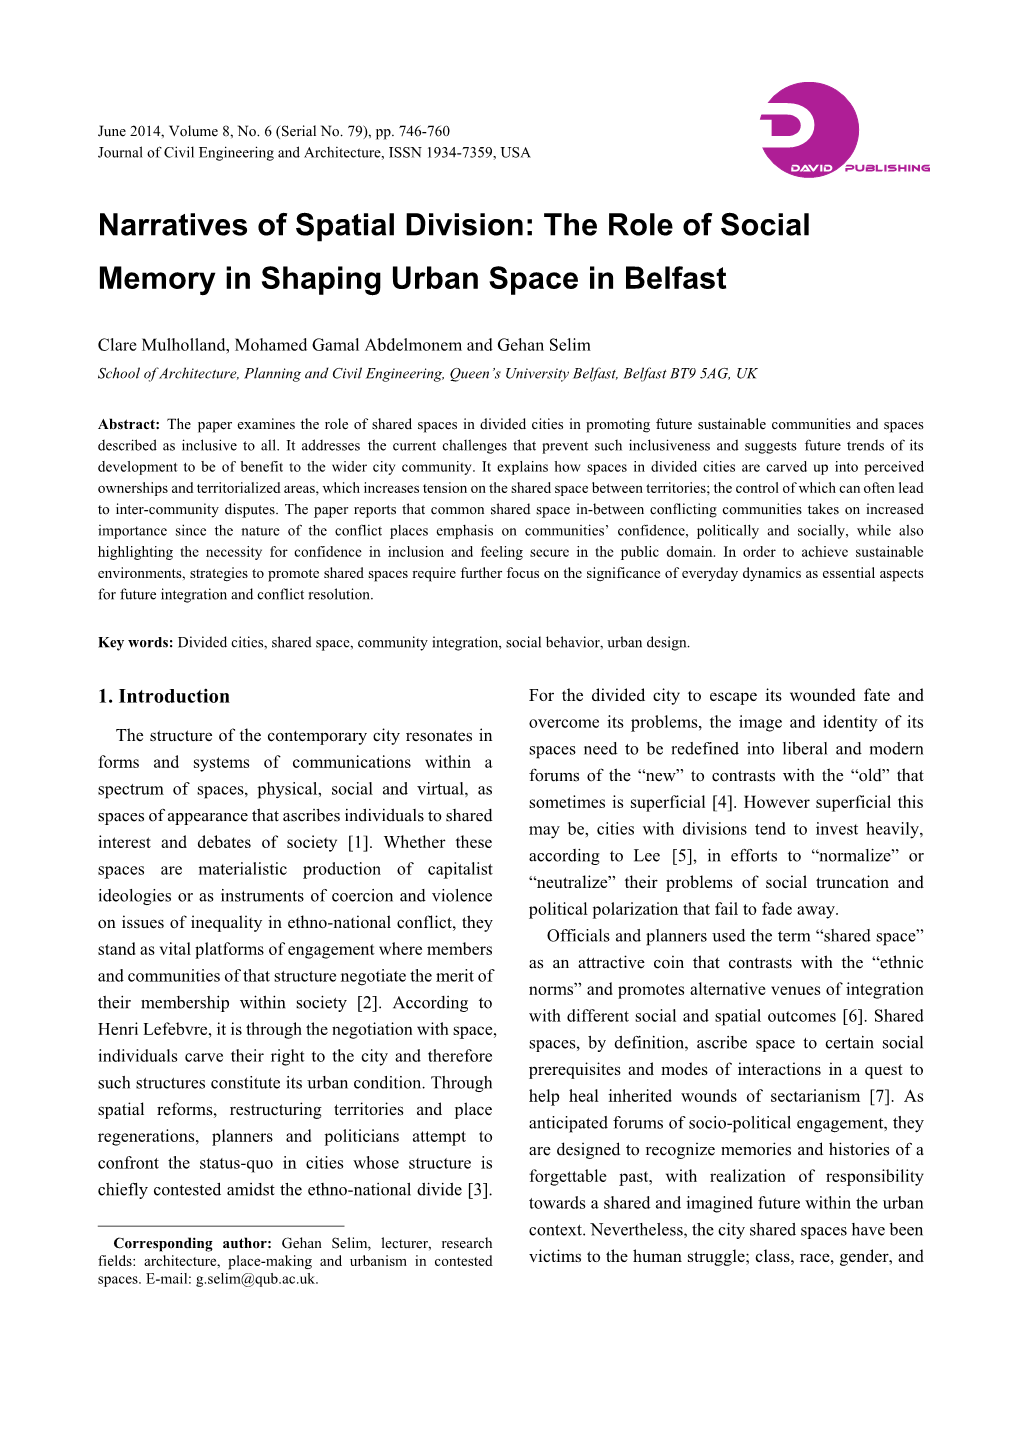 Narratives of Spatial Division: the Role of Social Memory in Shaping Urban Space in Belfast